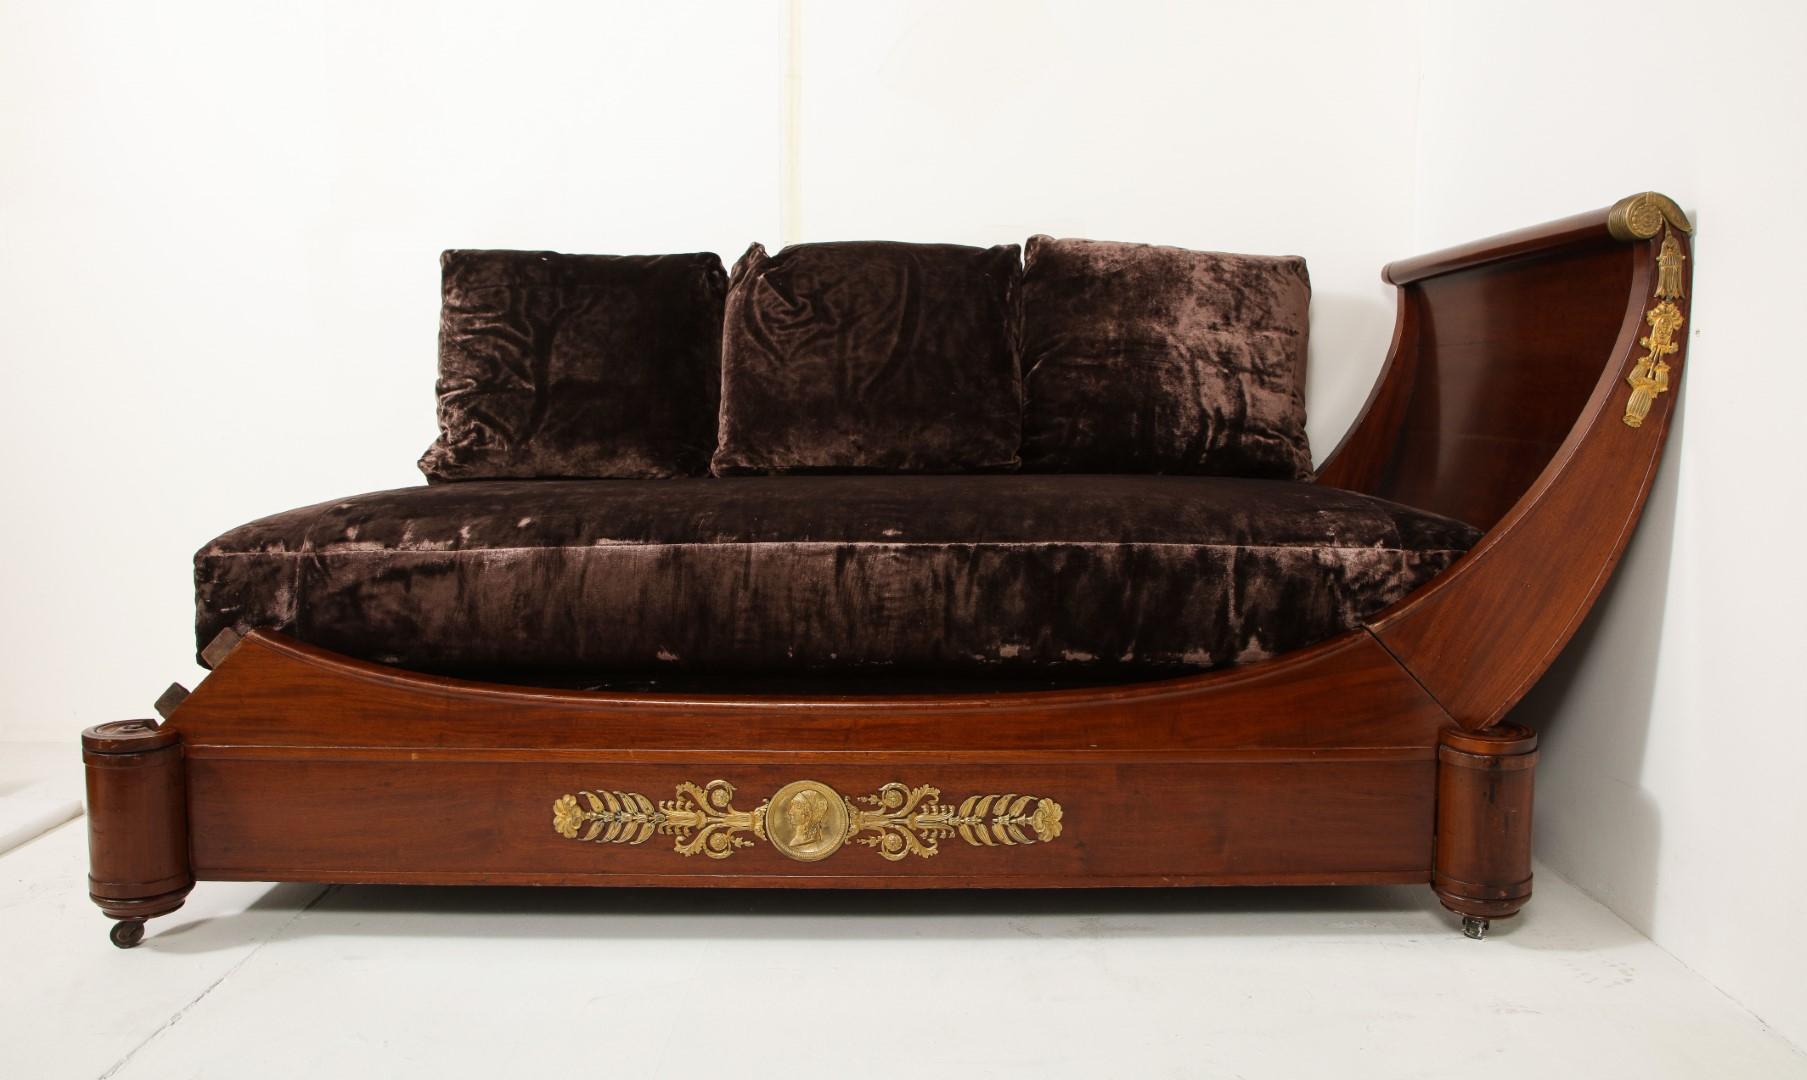 French Empire style mahogany daybed on casters with ormolu gilt bronze mounts and chocolate velvet upholstery.